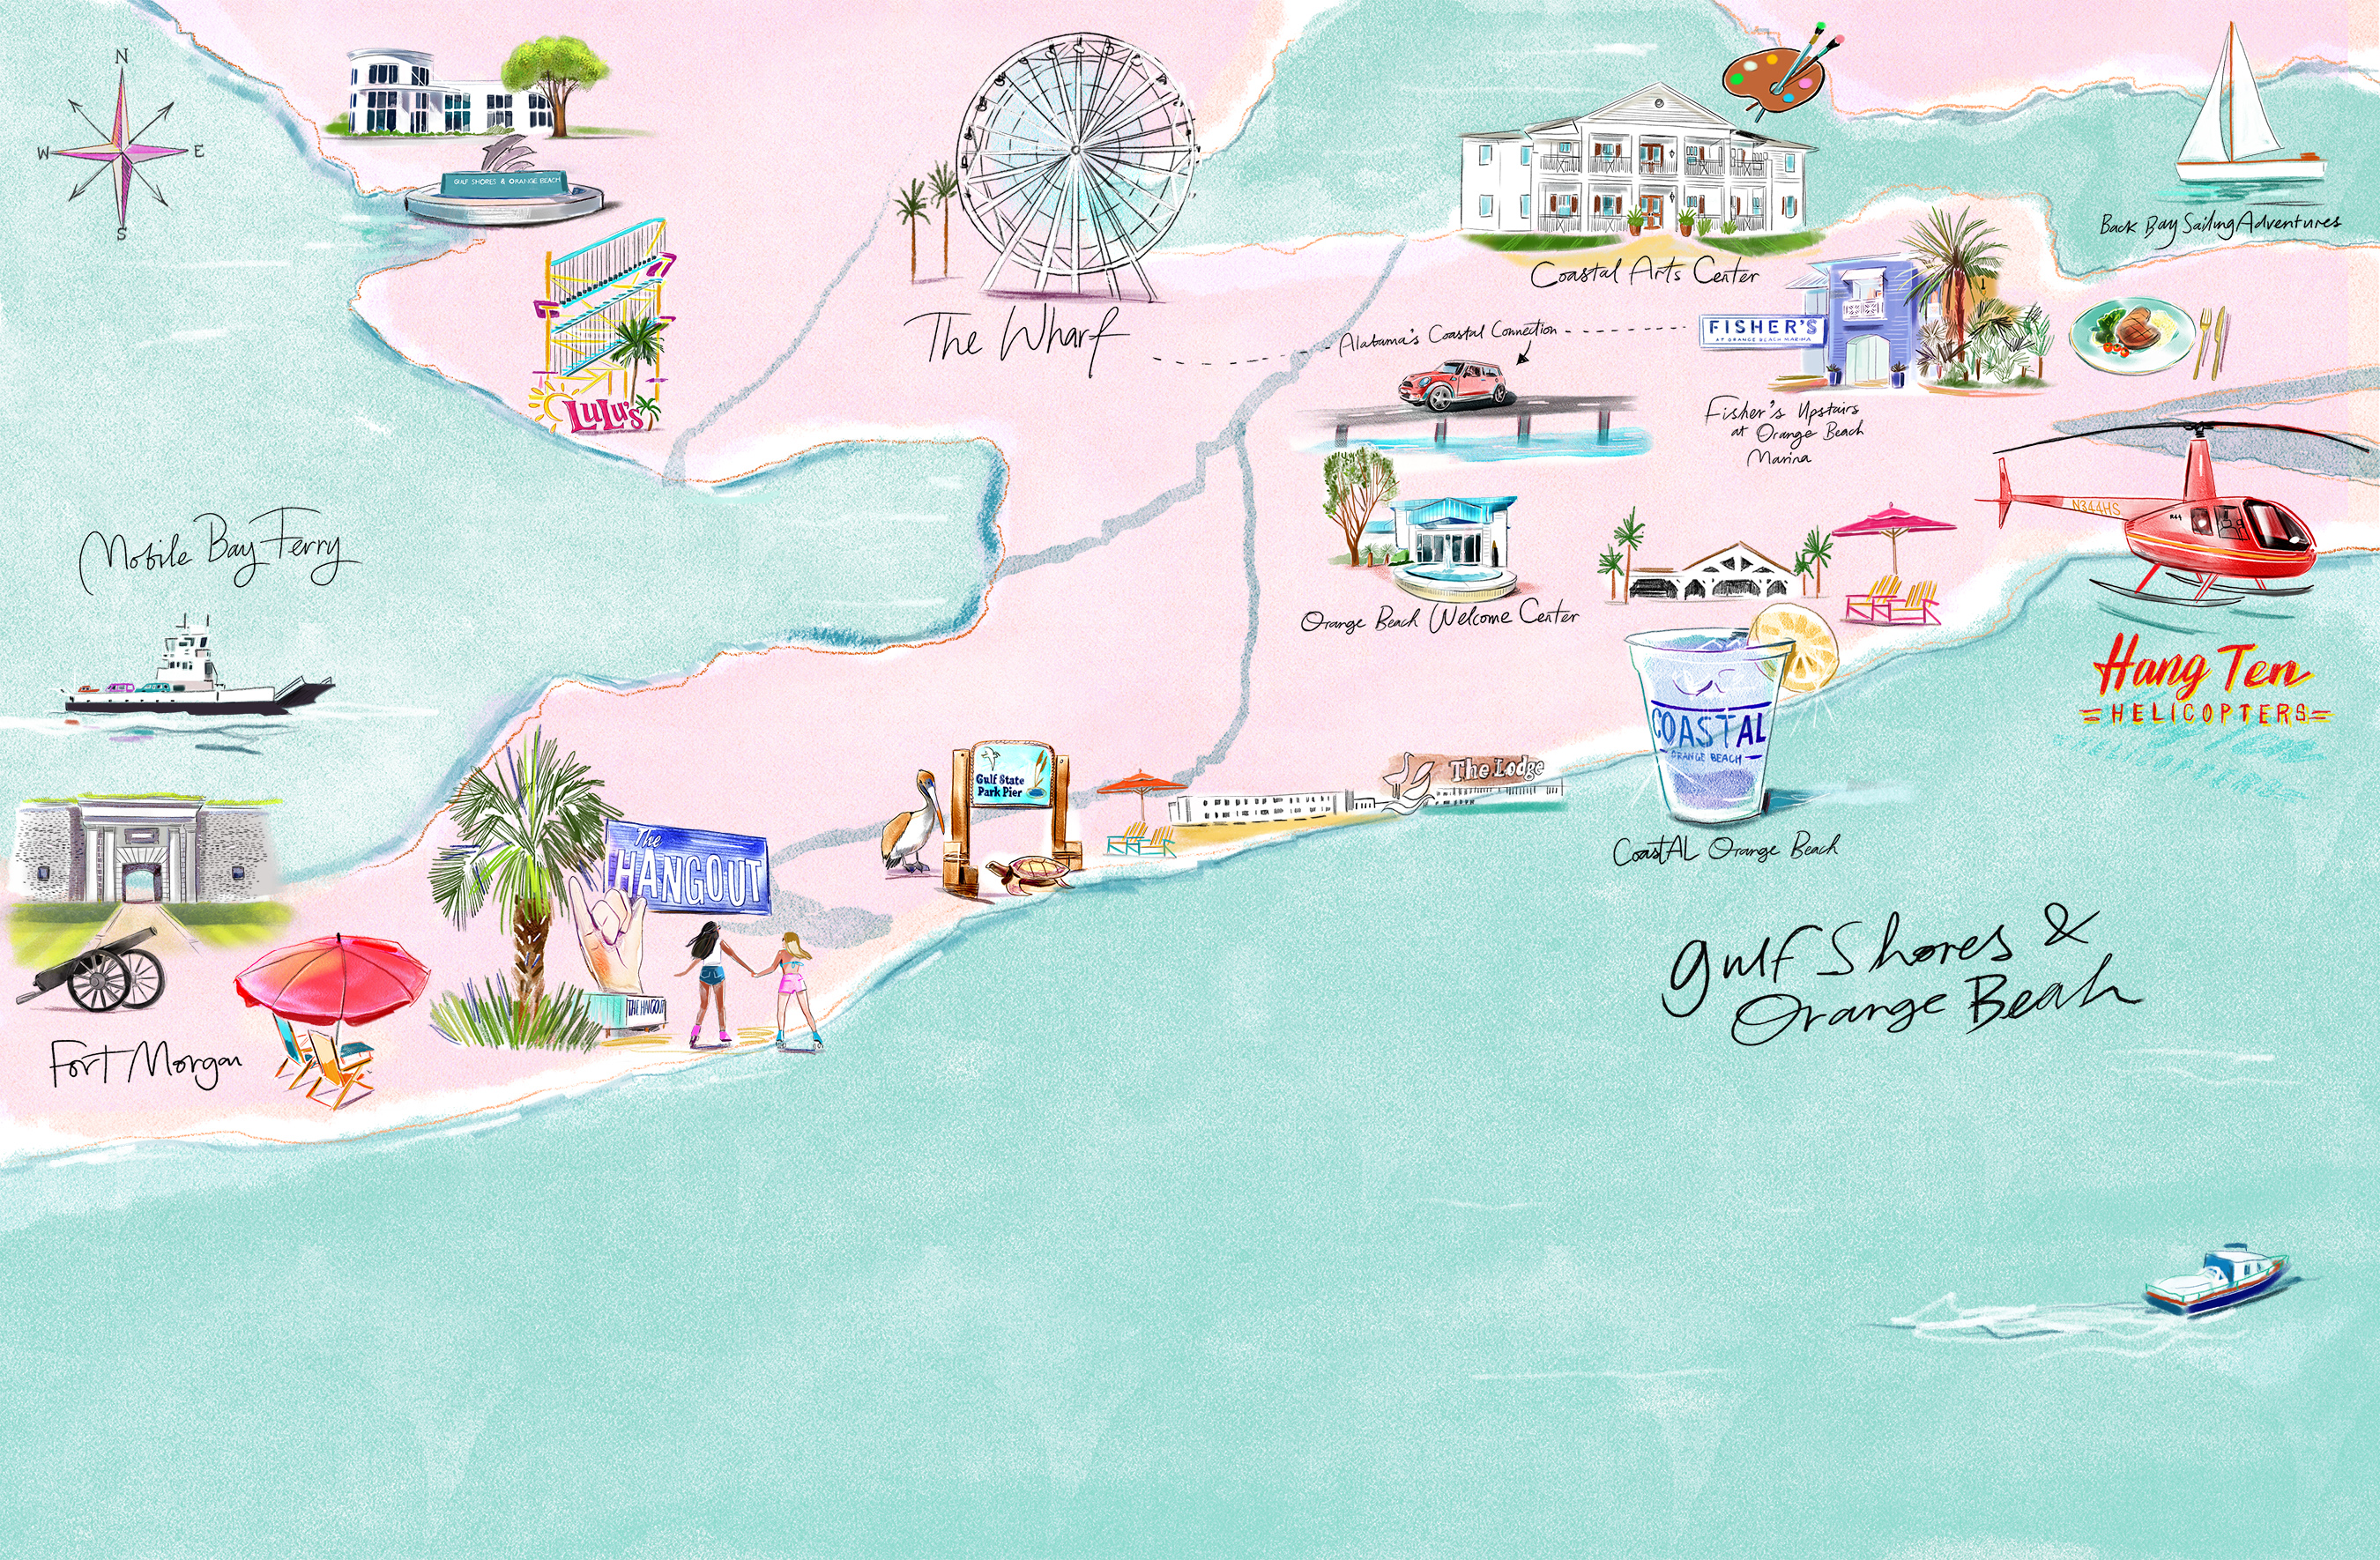 Gulf Shores Editorial Map Illustration Lucy Truman